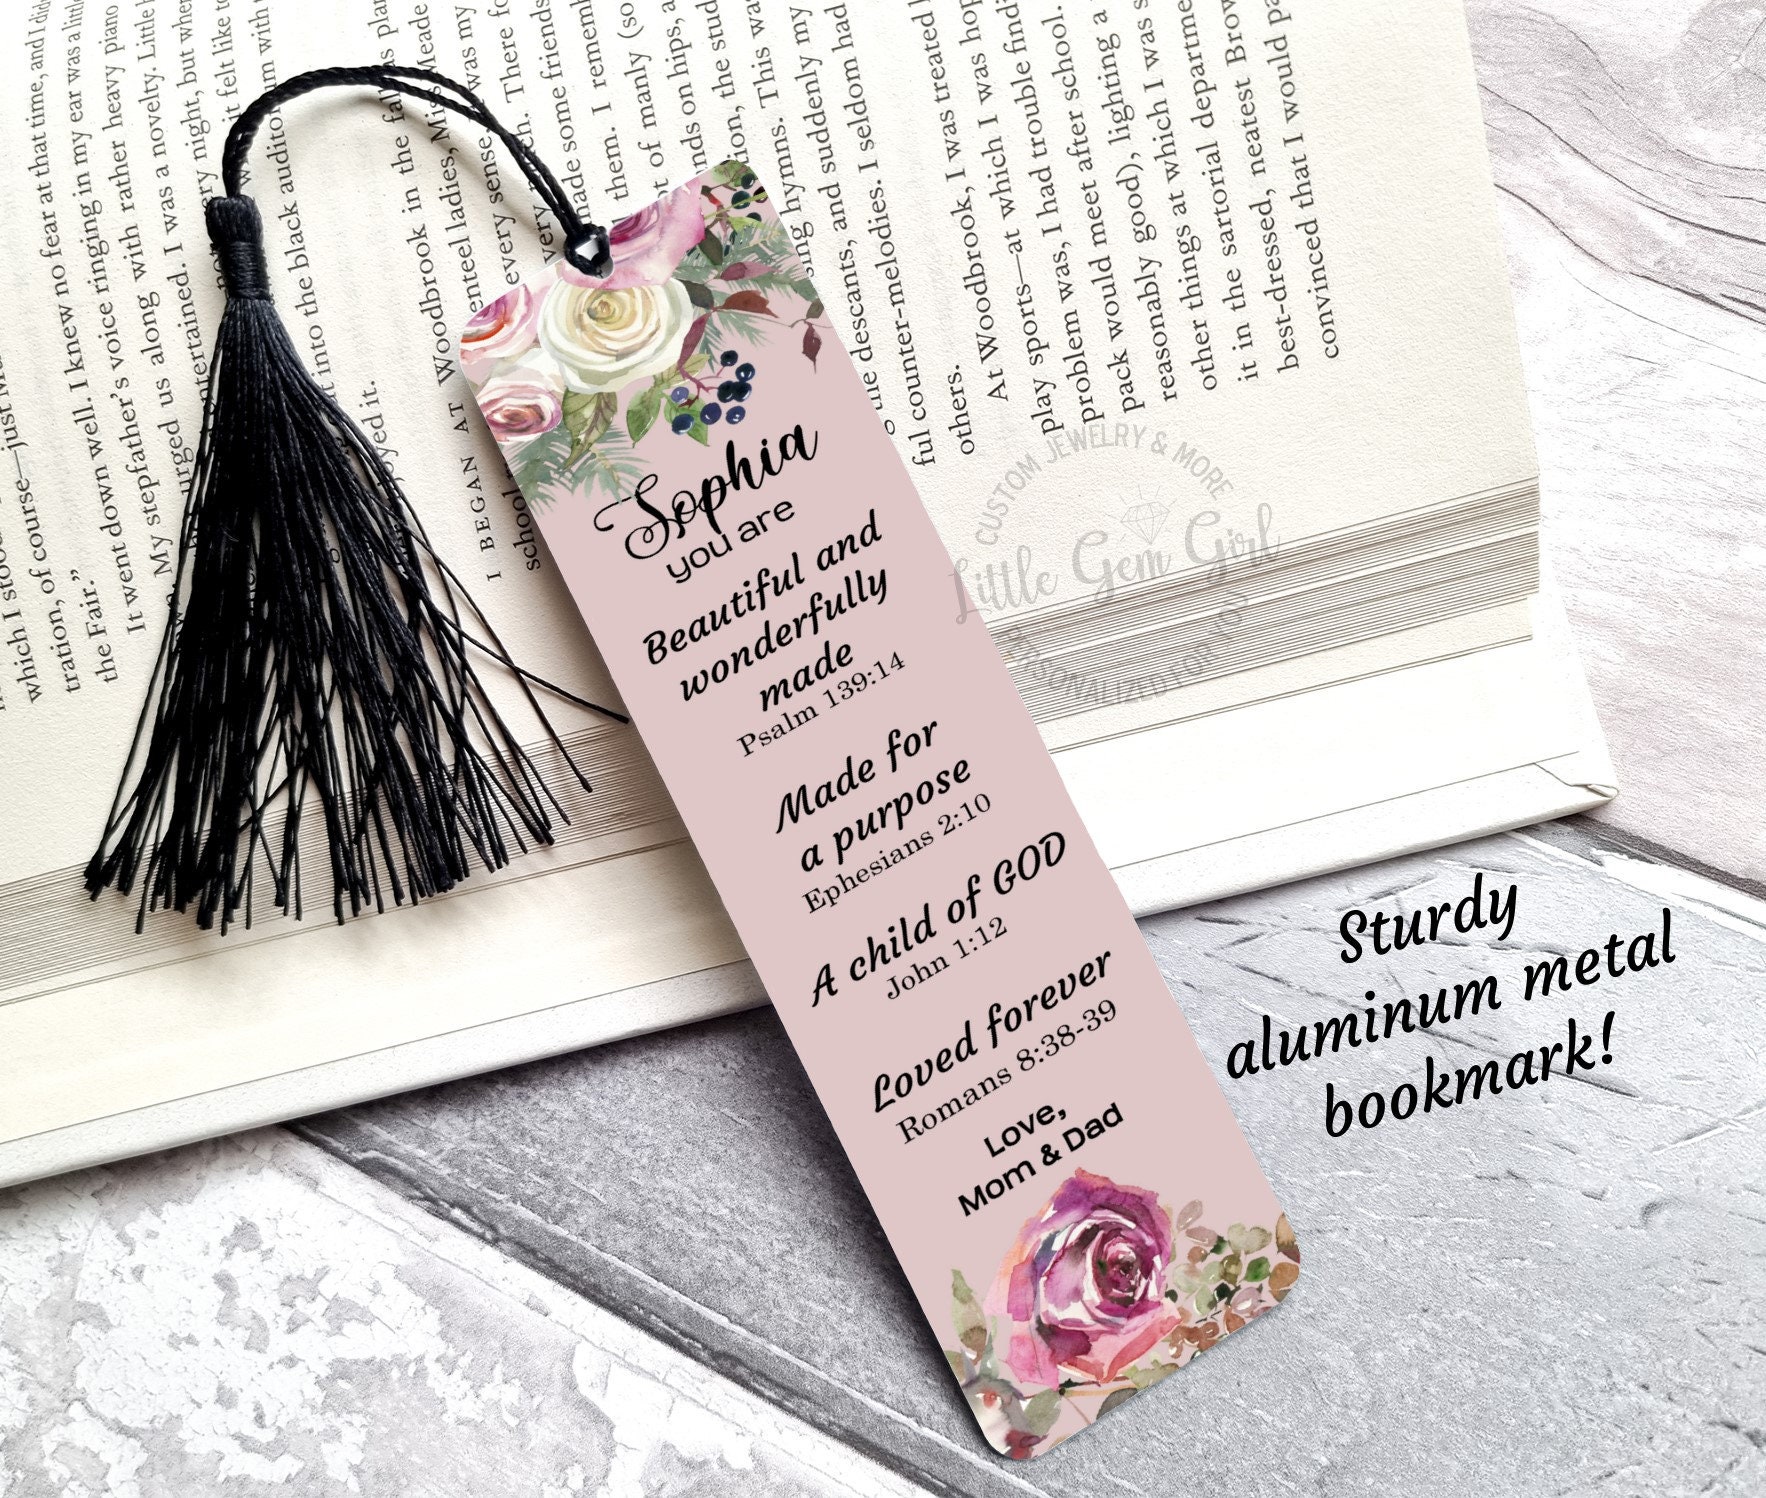 6 Pieces Vintage Floral Flower Aluminum Metal Bookmarks with Tassels,  Elegant Page Markers Insert, Reading Gift for Reader, Book Lovers, Student